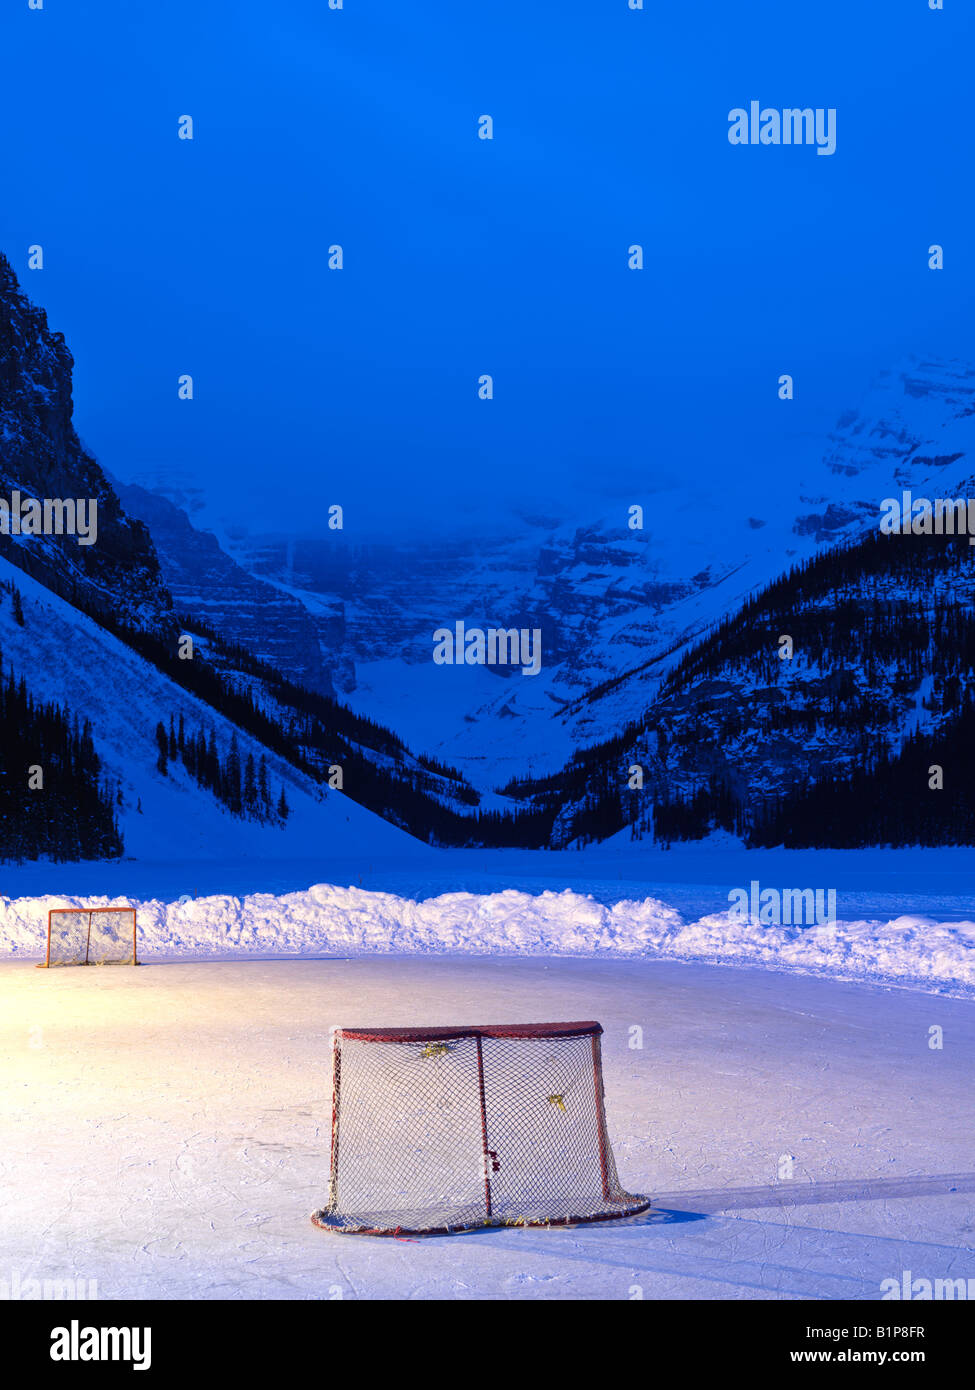 Canada Alberta Banff National Park Lake Louise ice rink with hockey nets on frozen Lake Louise at dawn Stock Photo